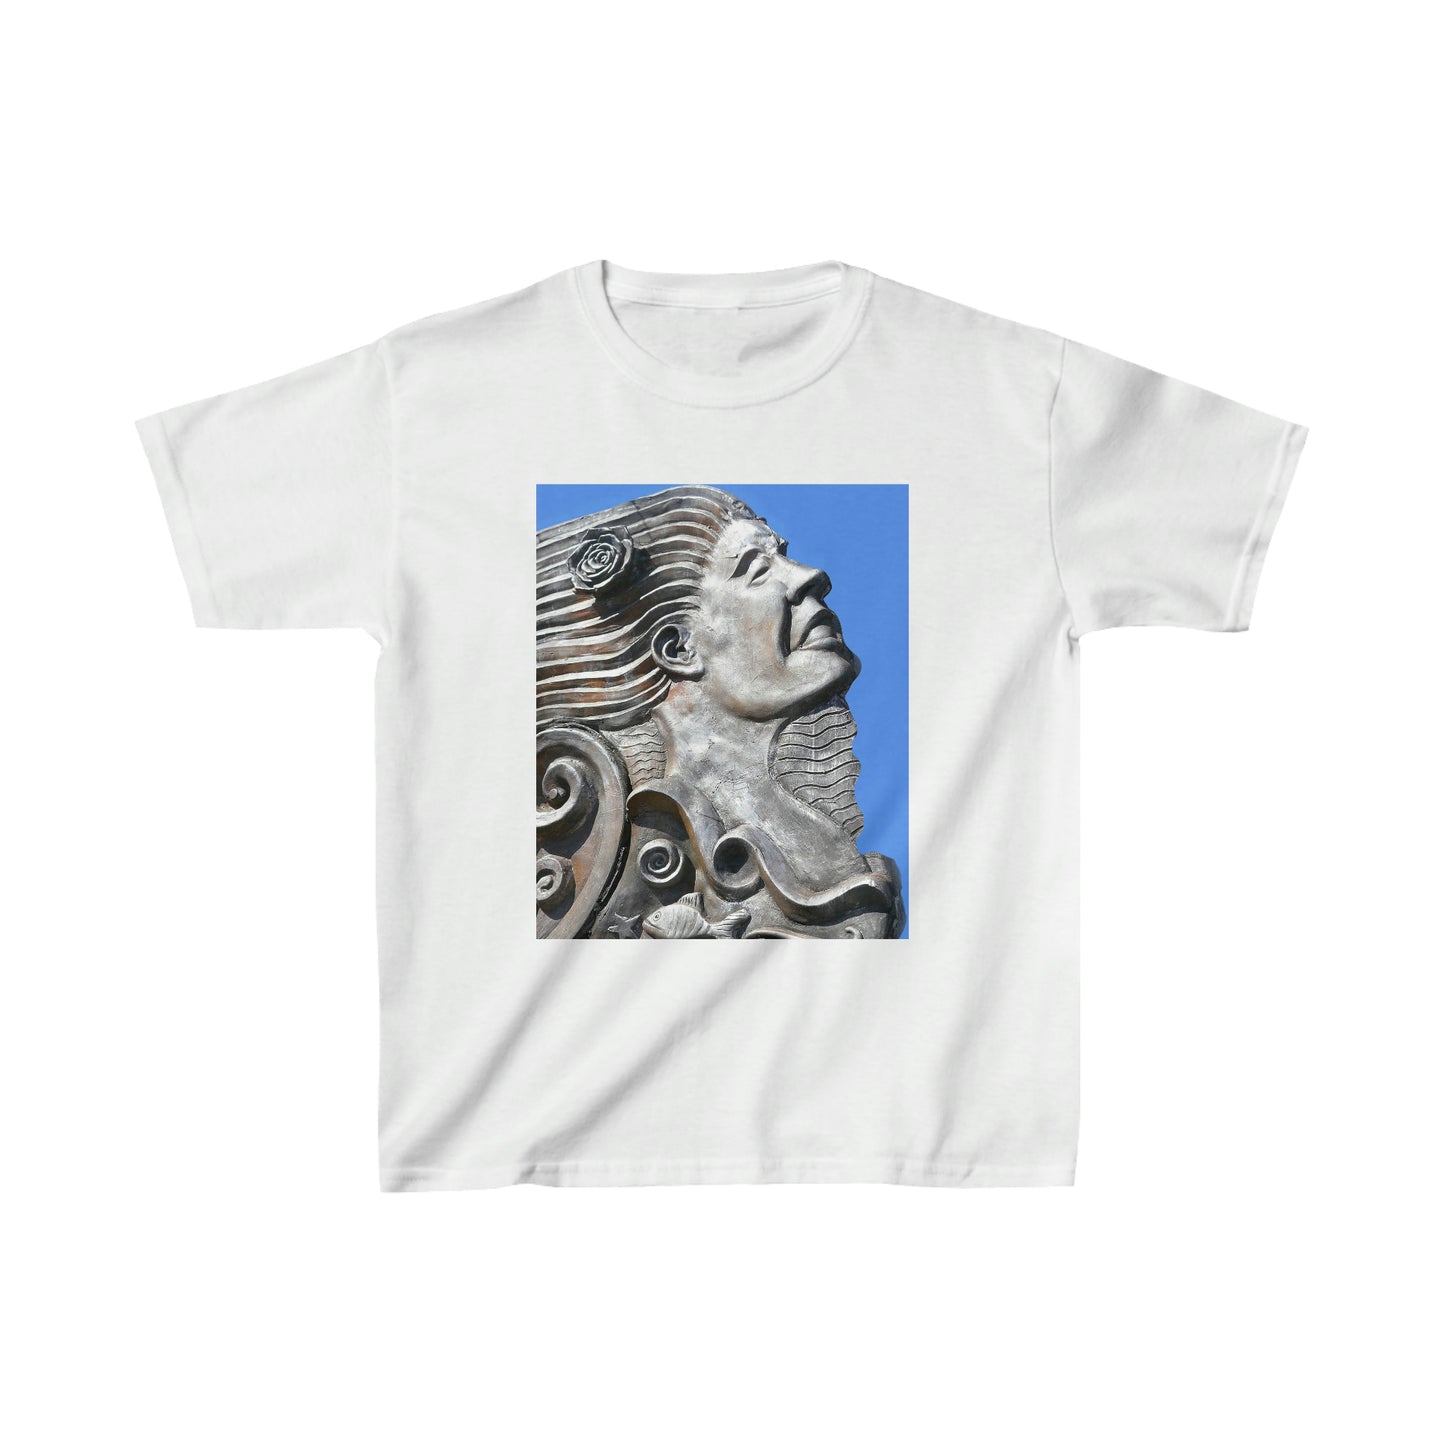 Nymph Beauty - Kids Cotton Tee - Fry1Productions